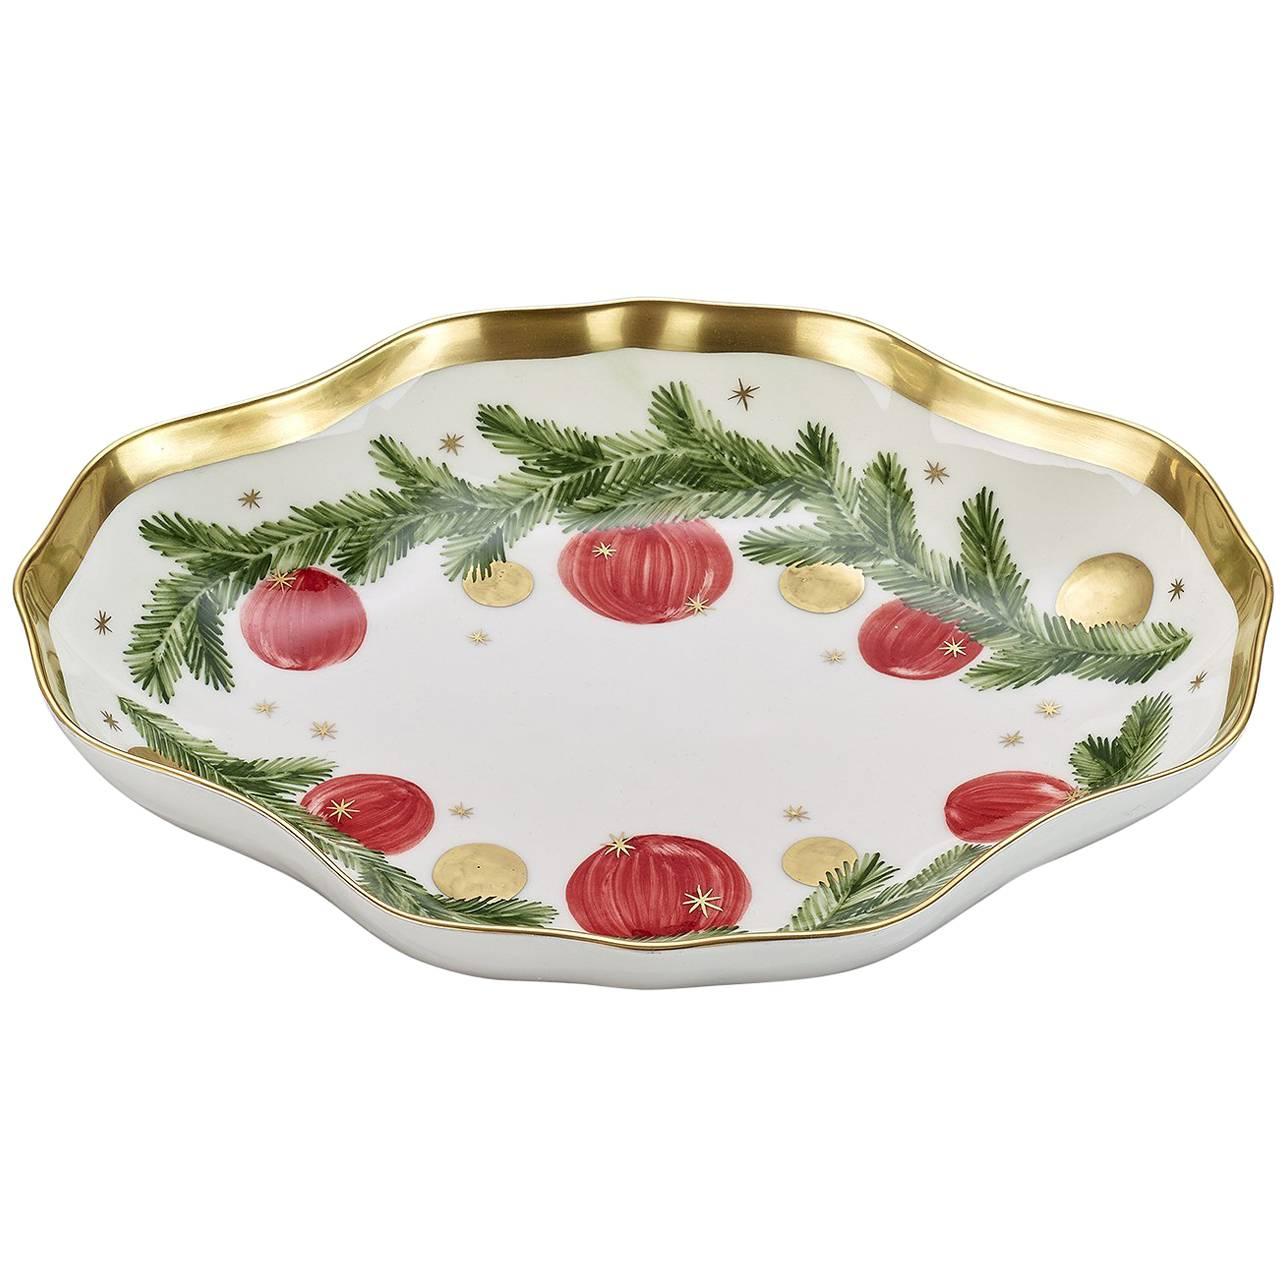  Country Style Porcelain Dish Christmas Garland Decor Sofina Boutique Kitzbuehel For Sale